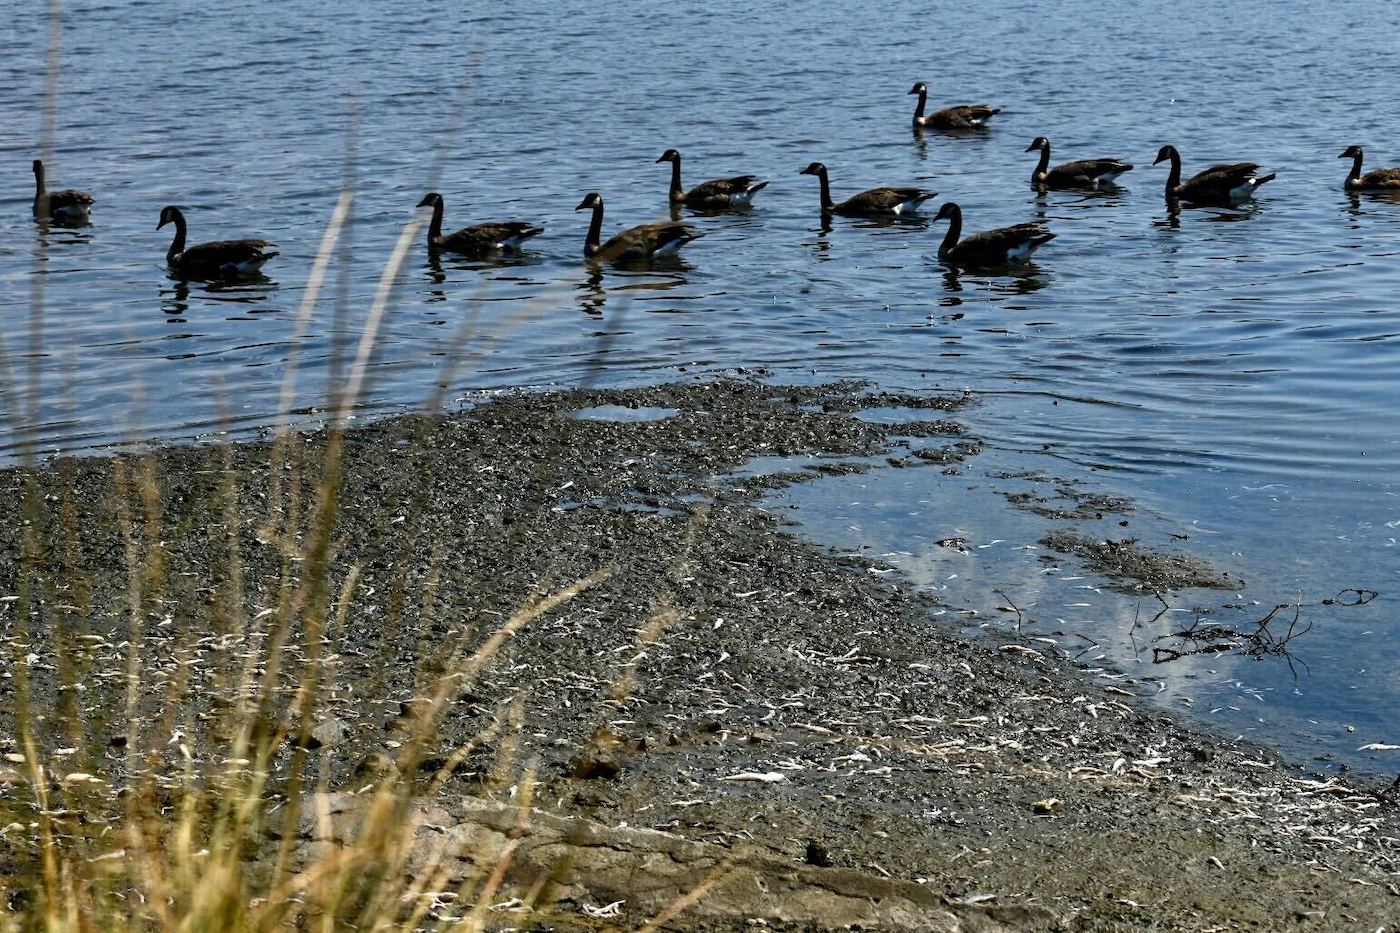 11 geese swim just a few feet from a muddy shore where fish remains lie.